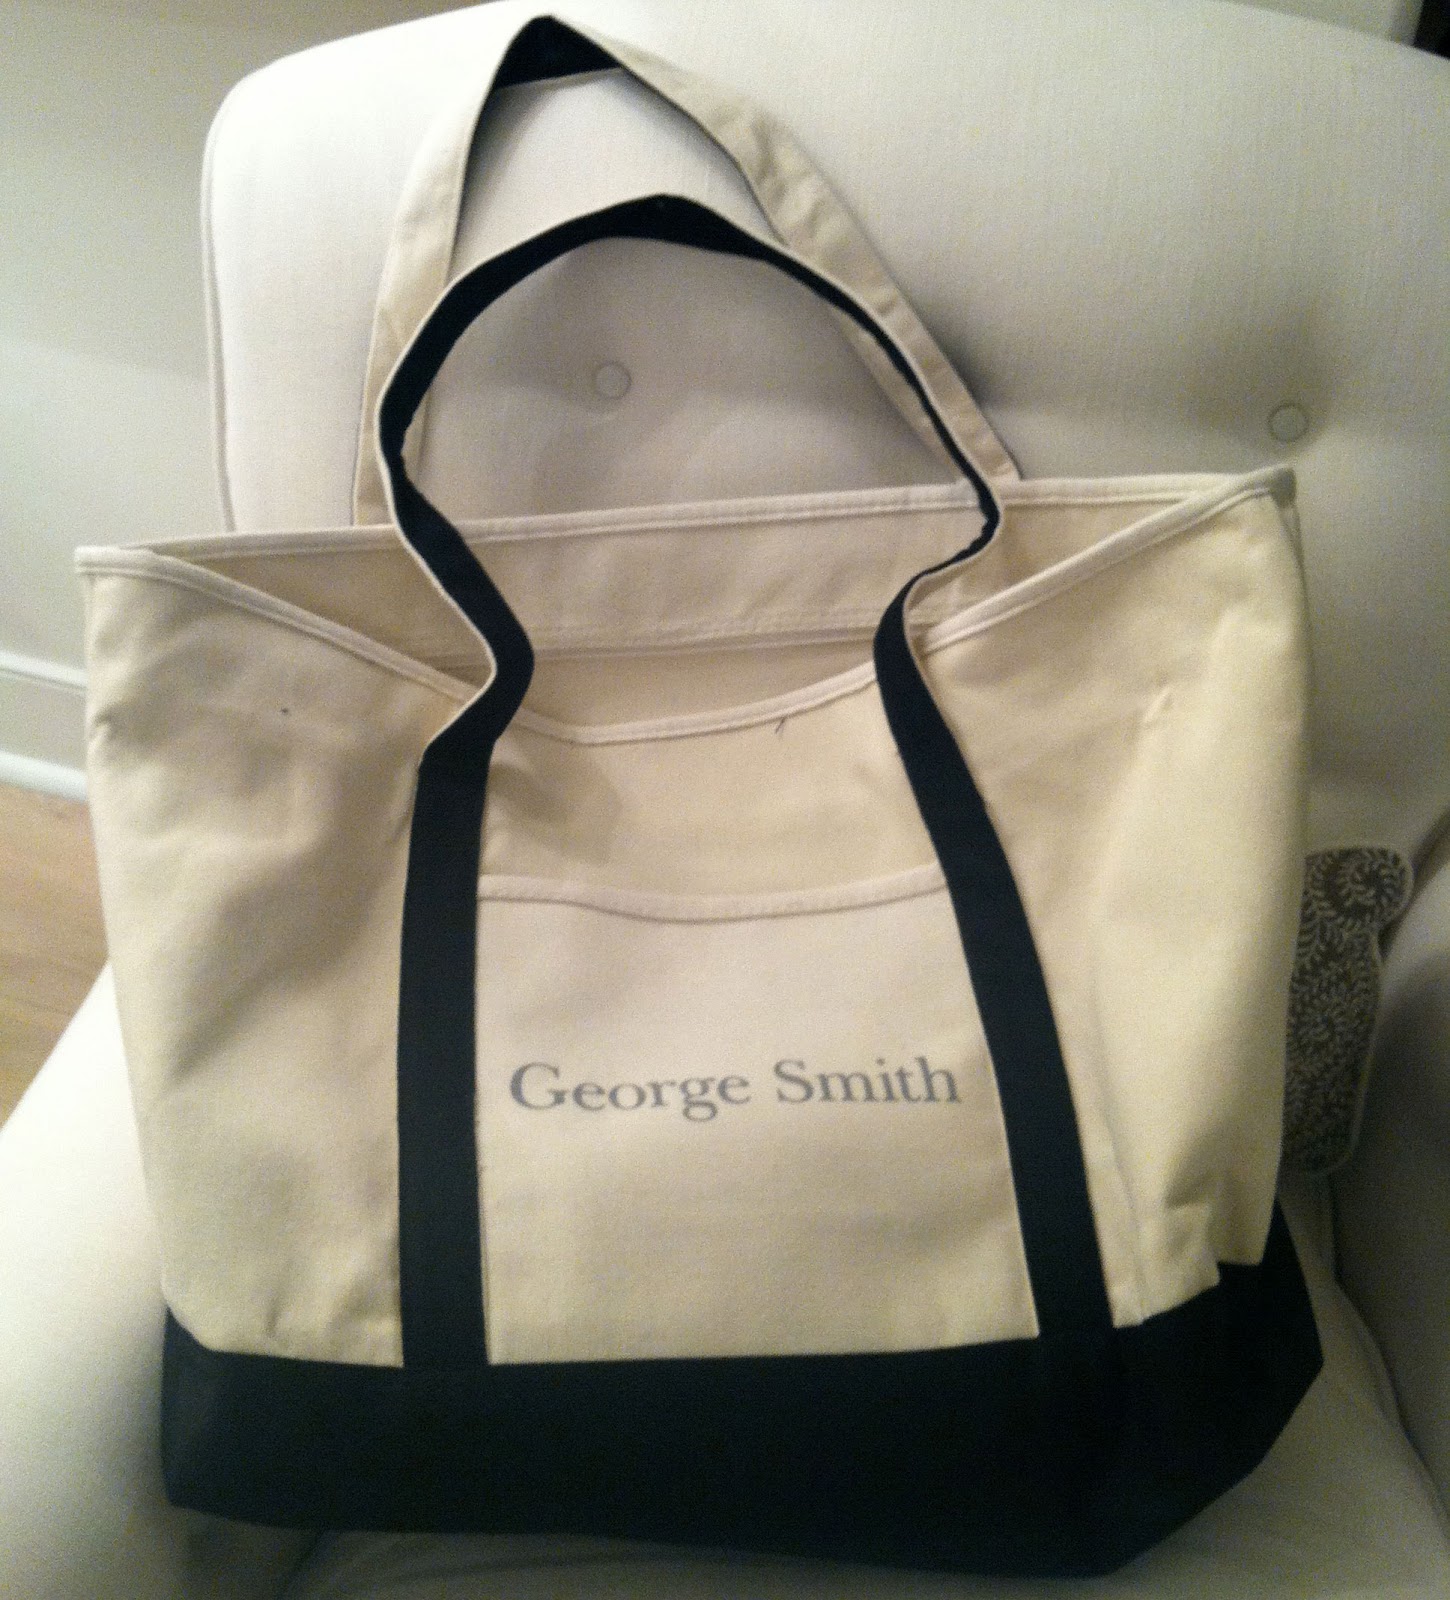 maison21: decorative but not serious...: dinner at george smith...